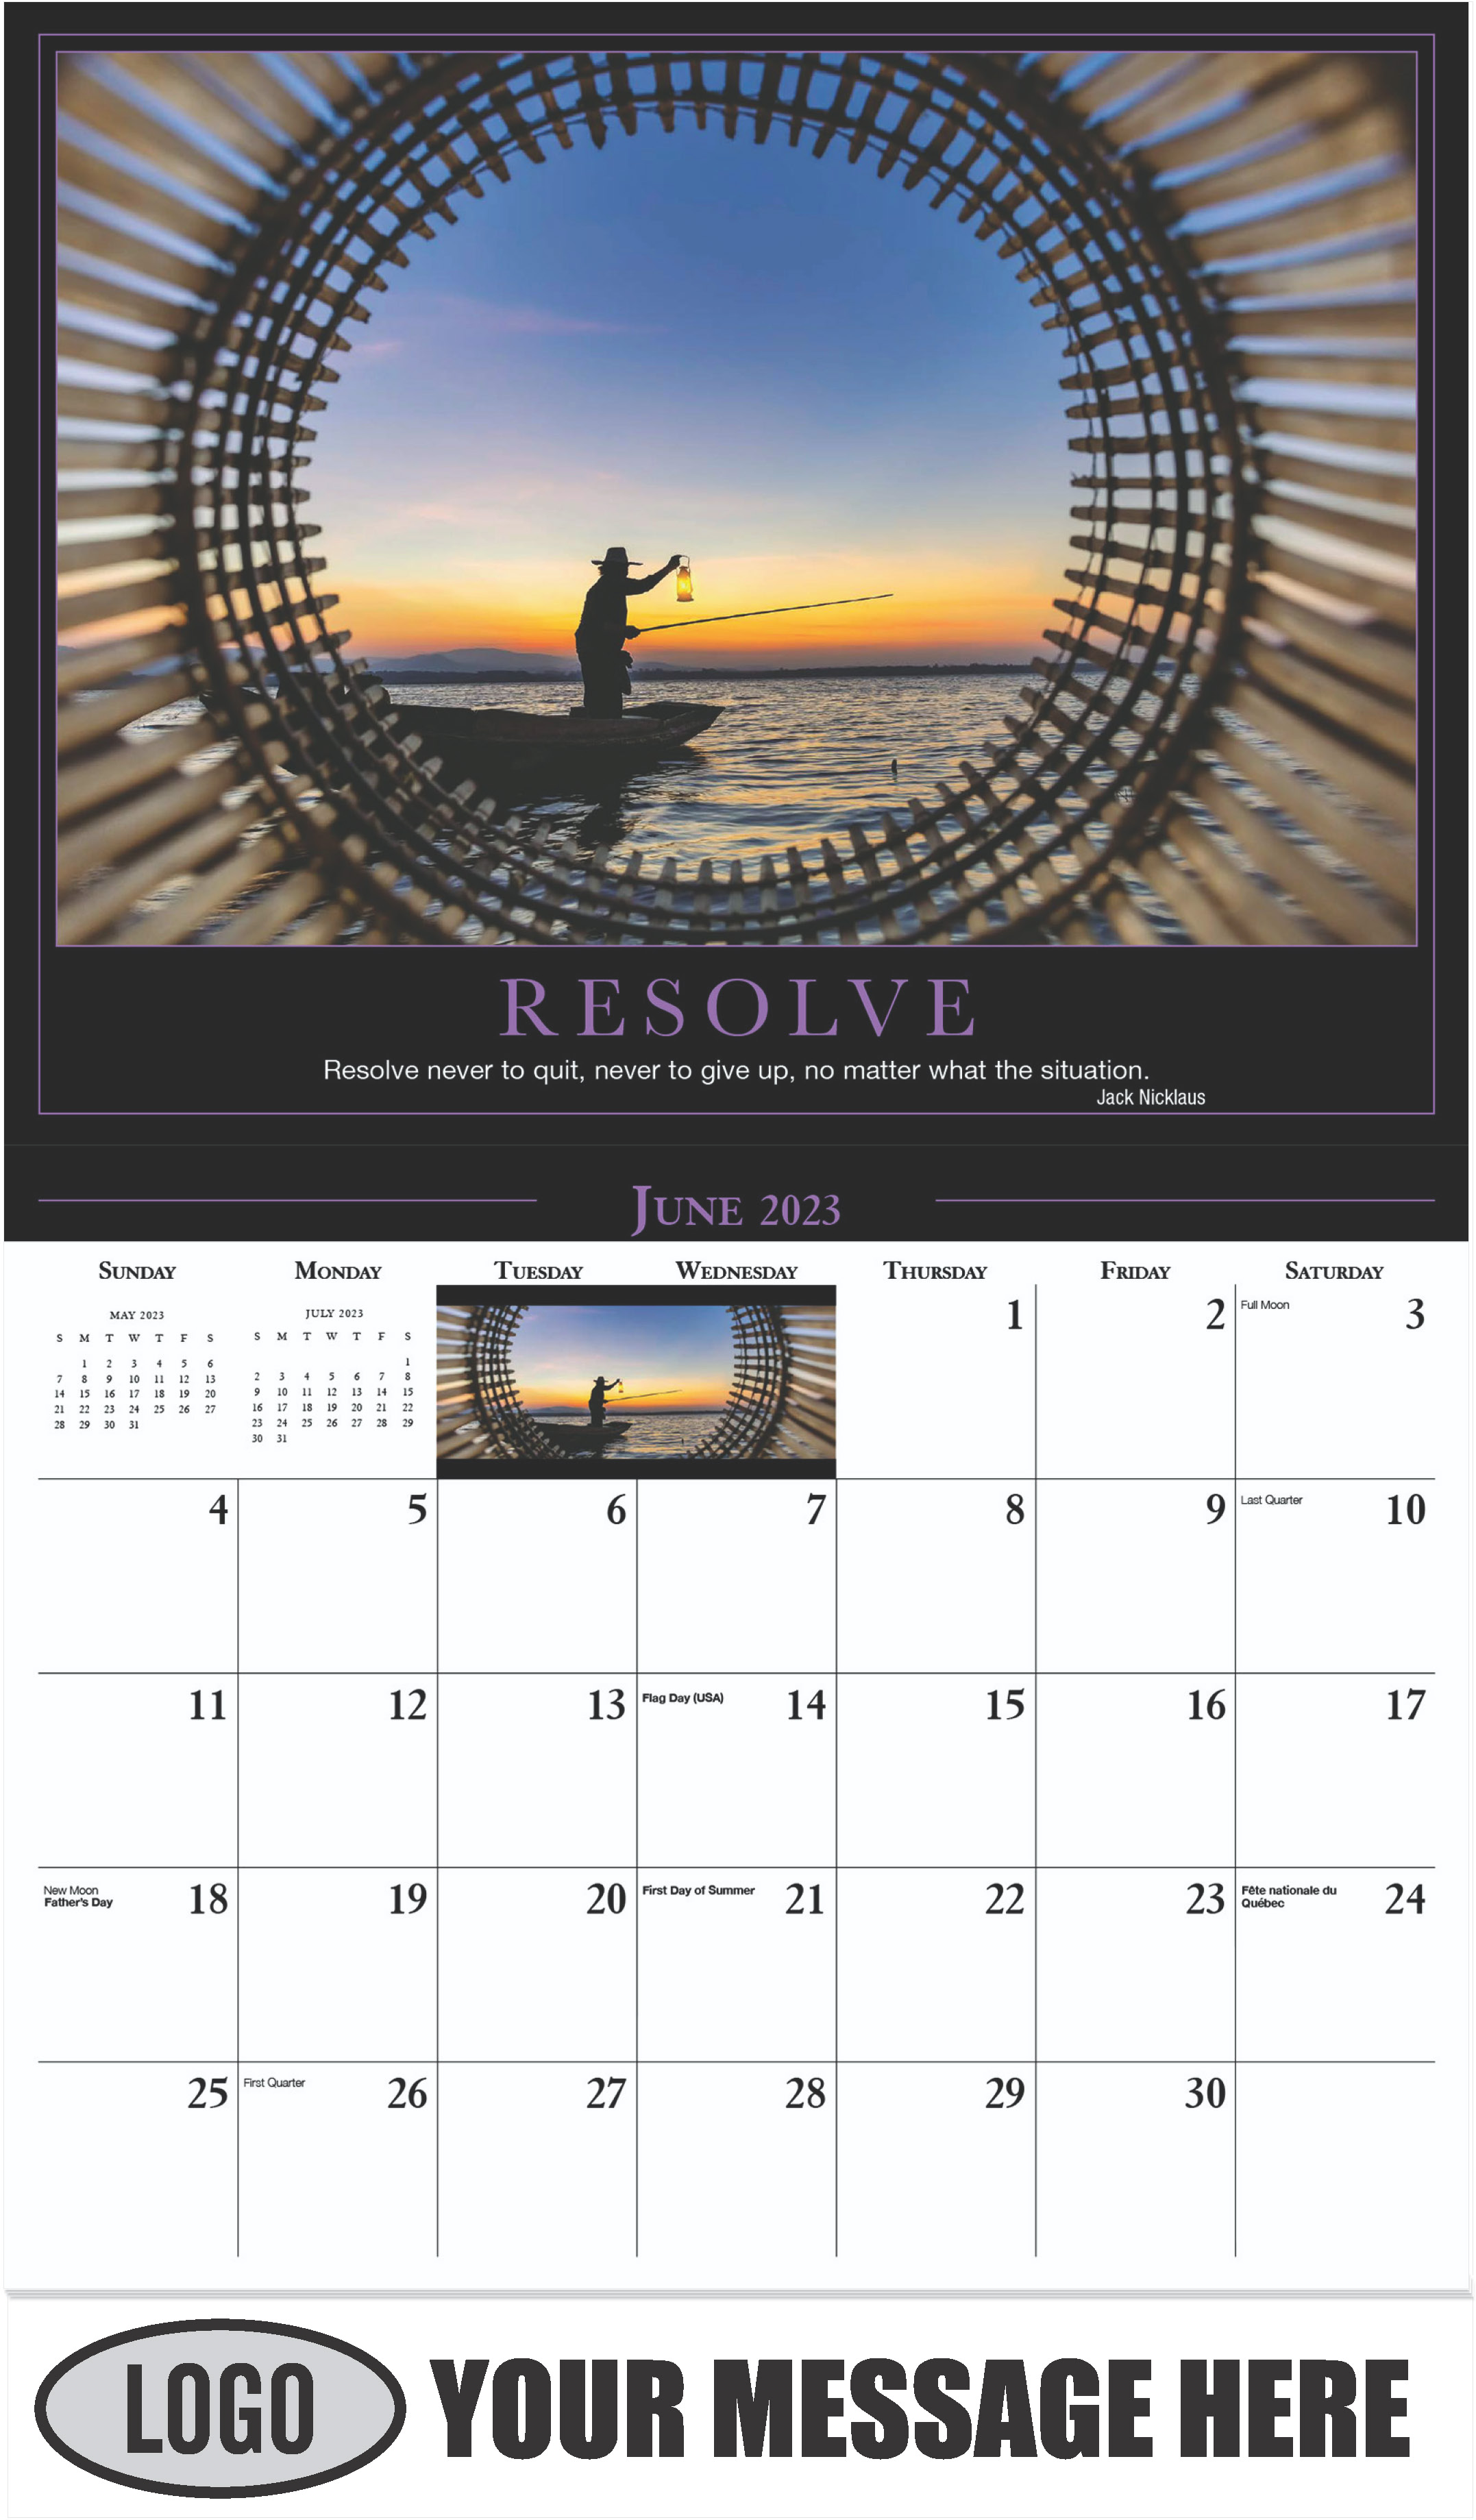 RESOLVE ''Resolve never to quit, never to give up, no matter what the situation.'' - Jack Nicklaus - June - Motivation 2023 Promotional Calendar